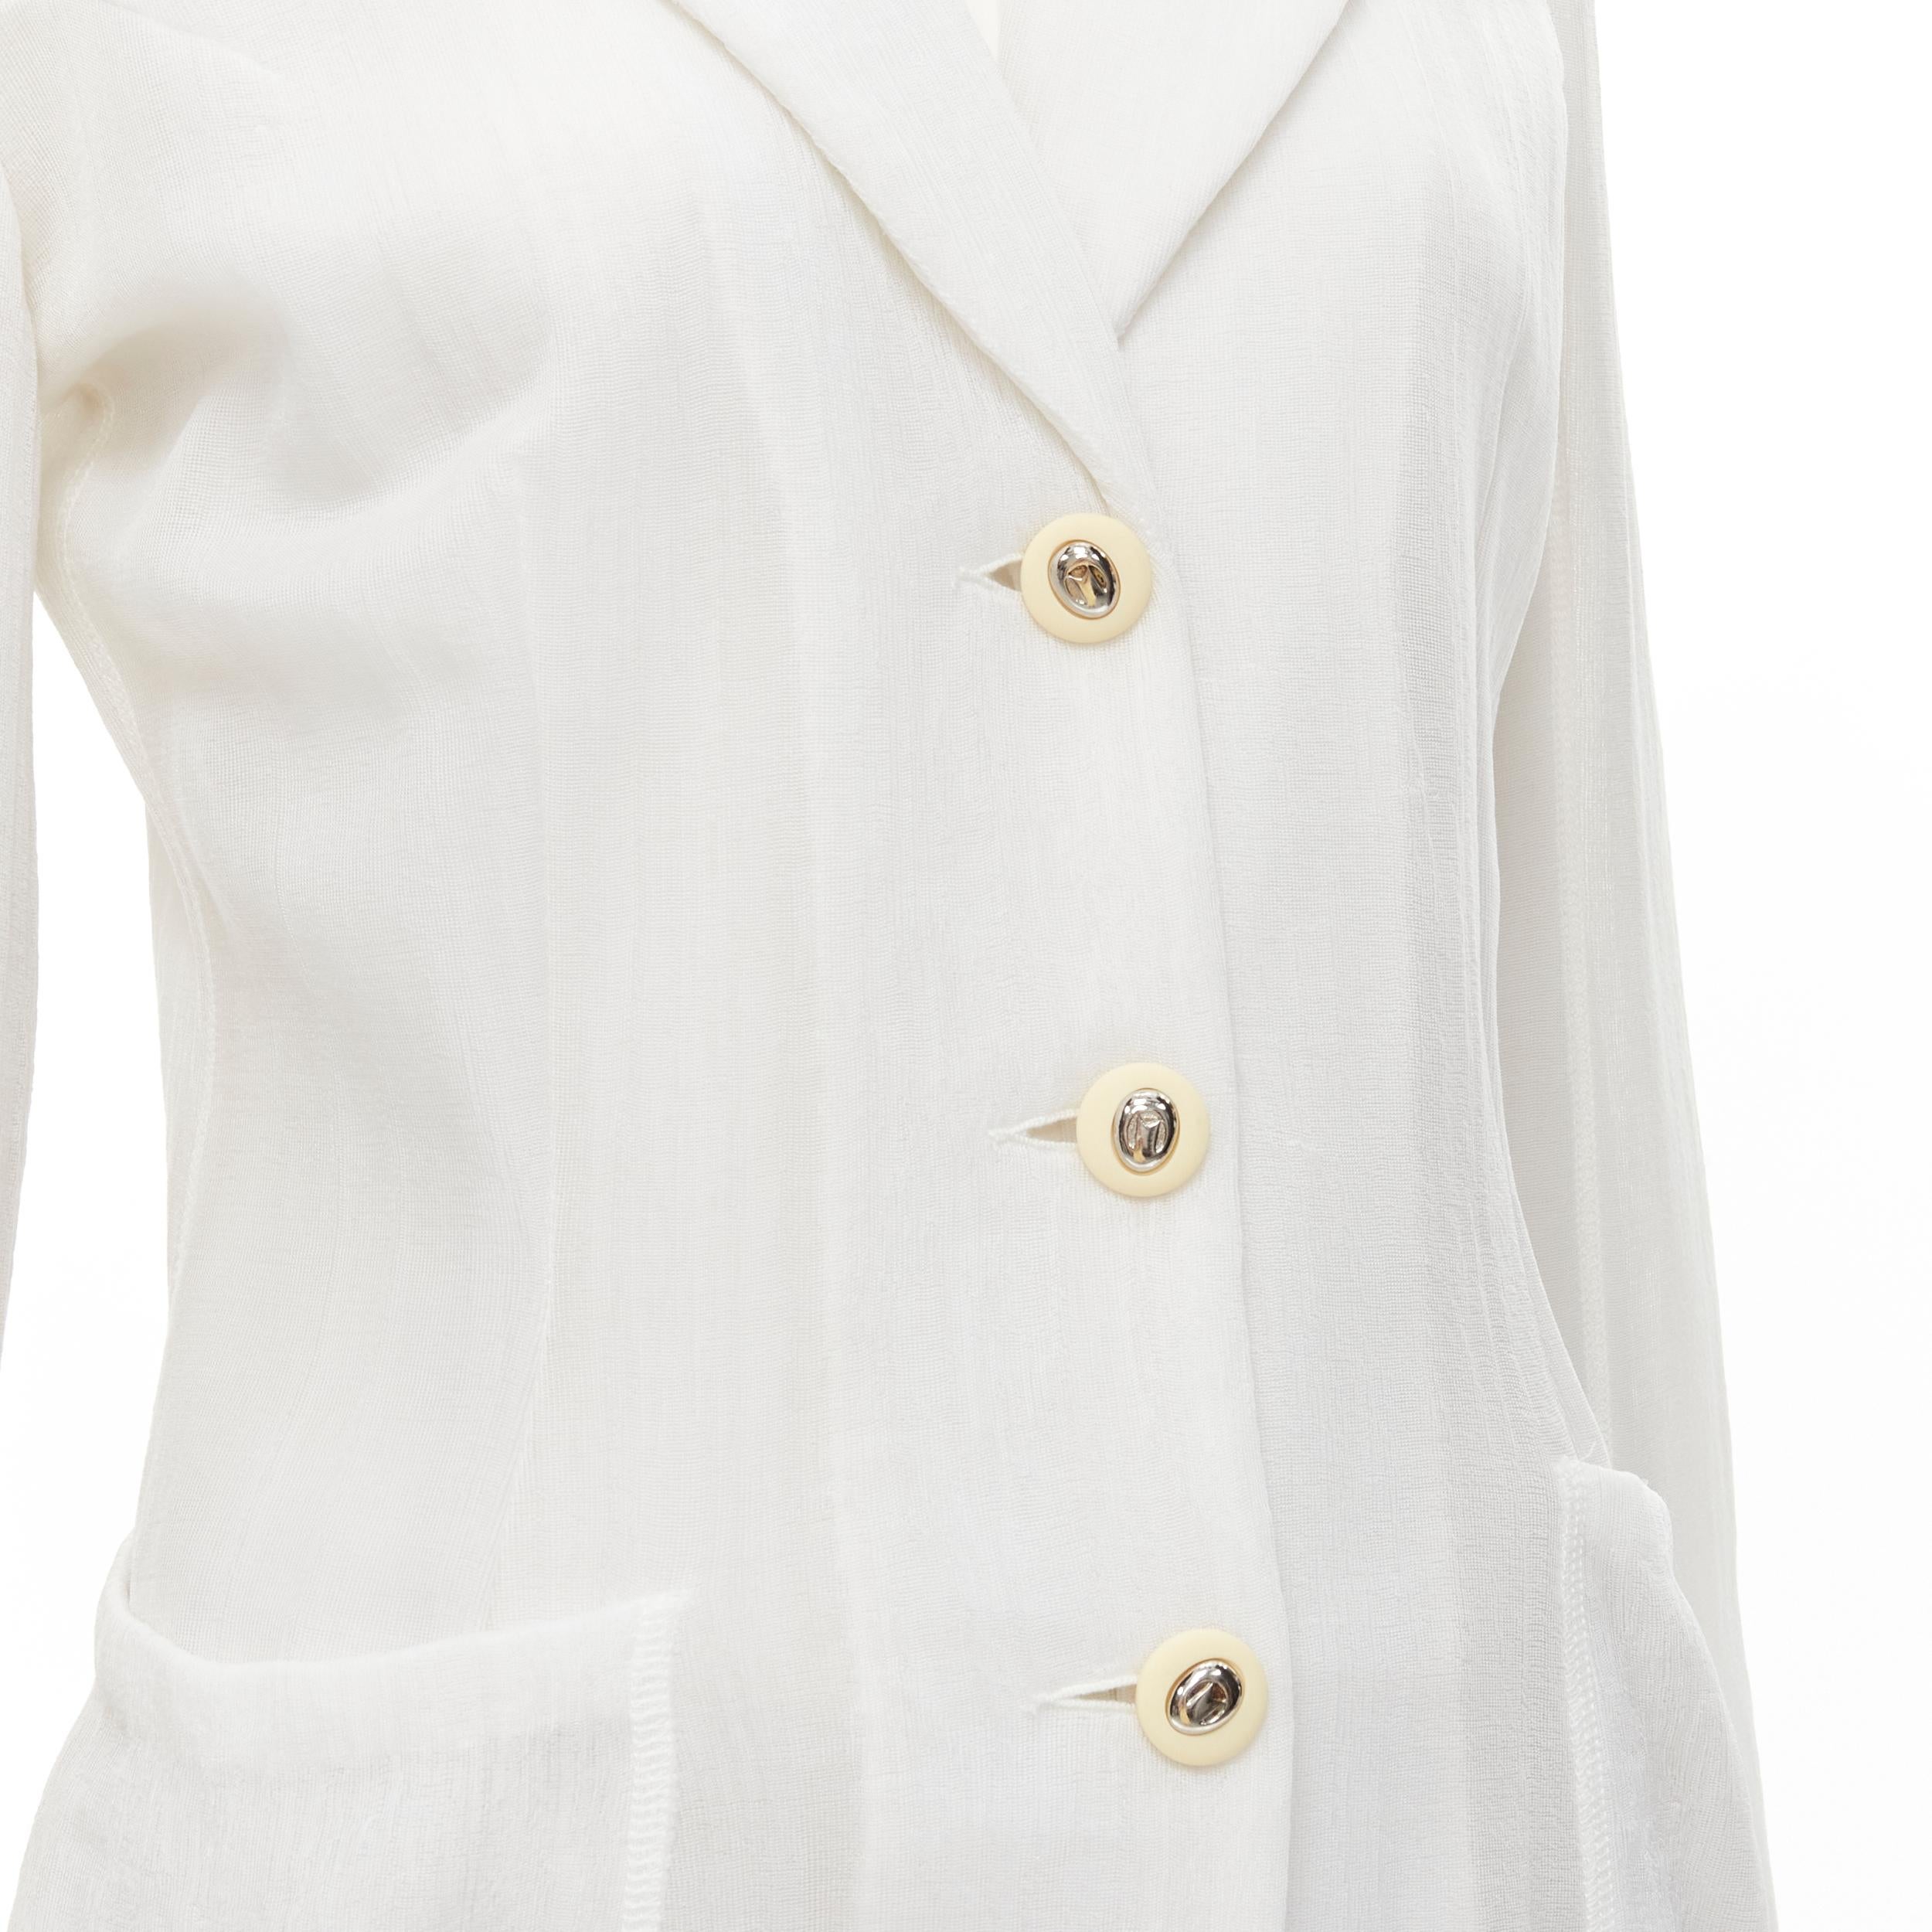 MARIOT CHANET white textured logo button fitted blazer wide leg pants IT42 M
Reference: GIYG/A00209
Brand: Mariot Chanet
Material: Fabric
Color: White
Pattern: Solid
Closure: Button
Lining: White Fabric
Extra Details: Silver metal and beige acrylic